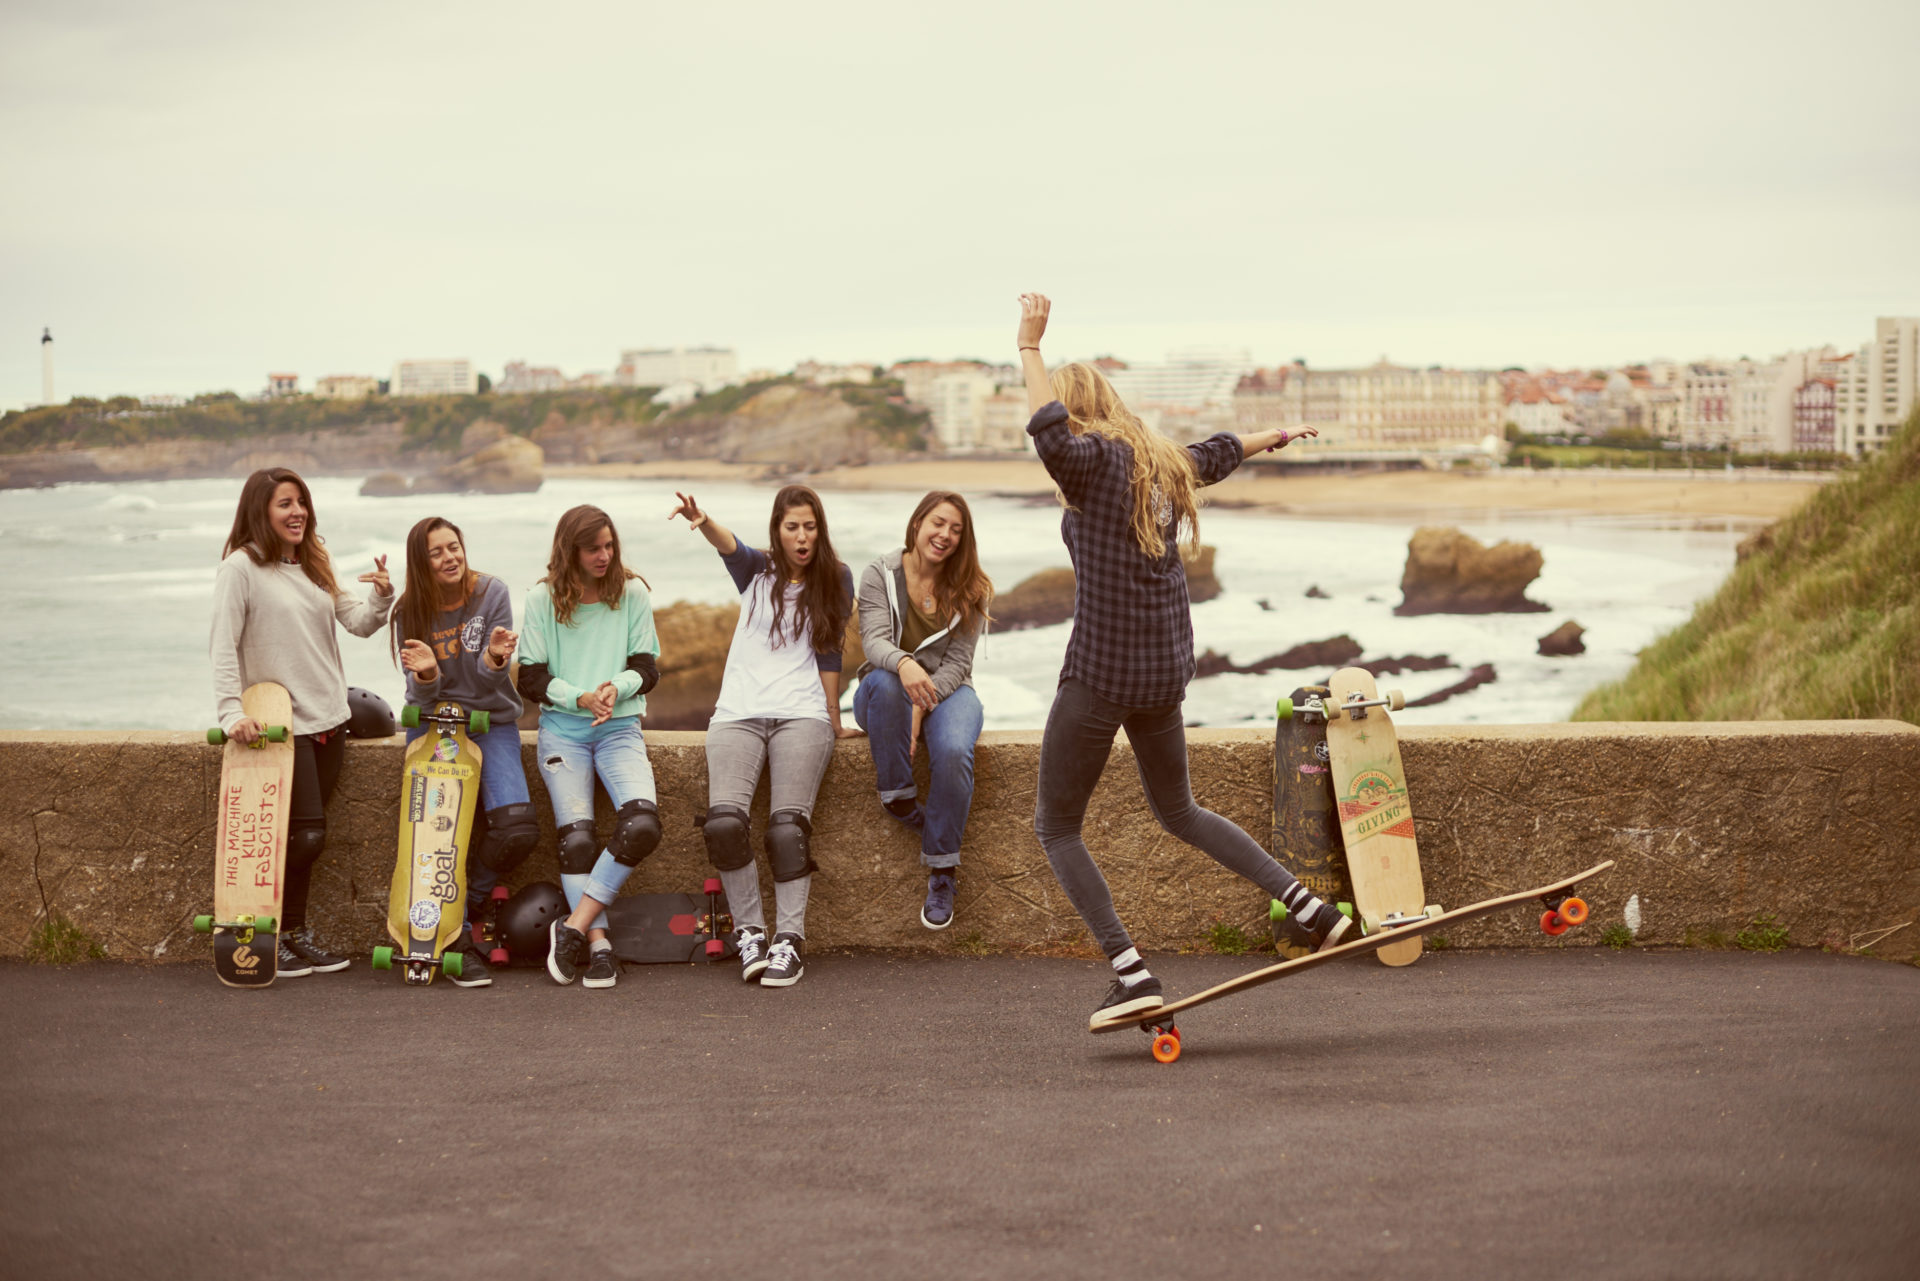 French mobile company Bouygues chose Longboard Girls Crew for their new campaign!